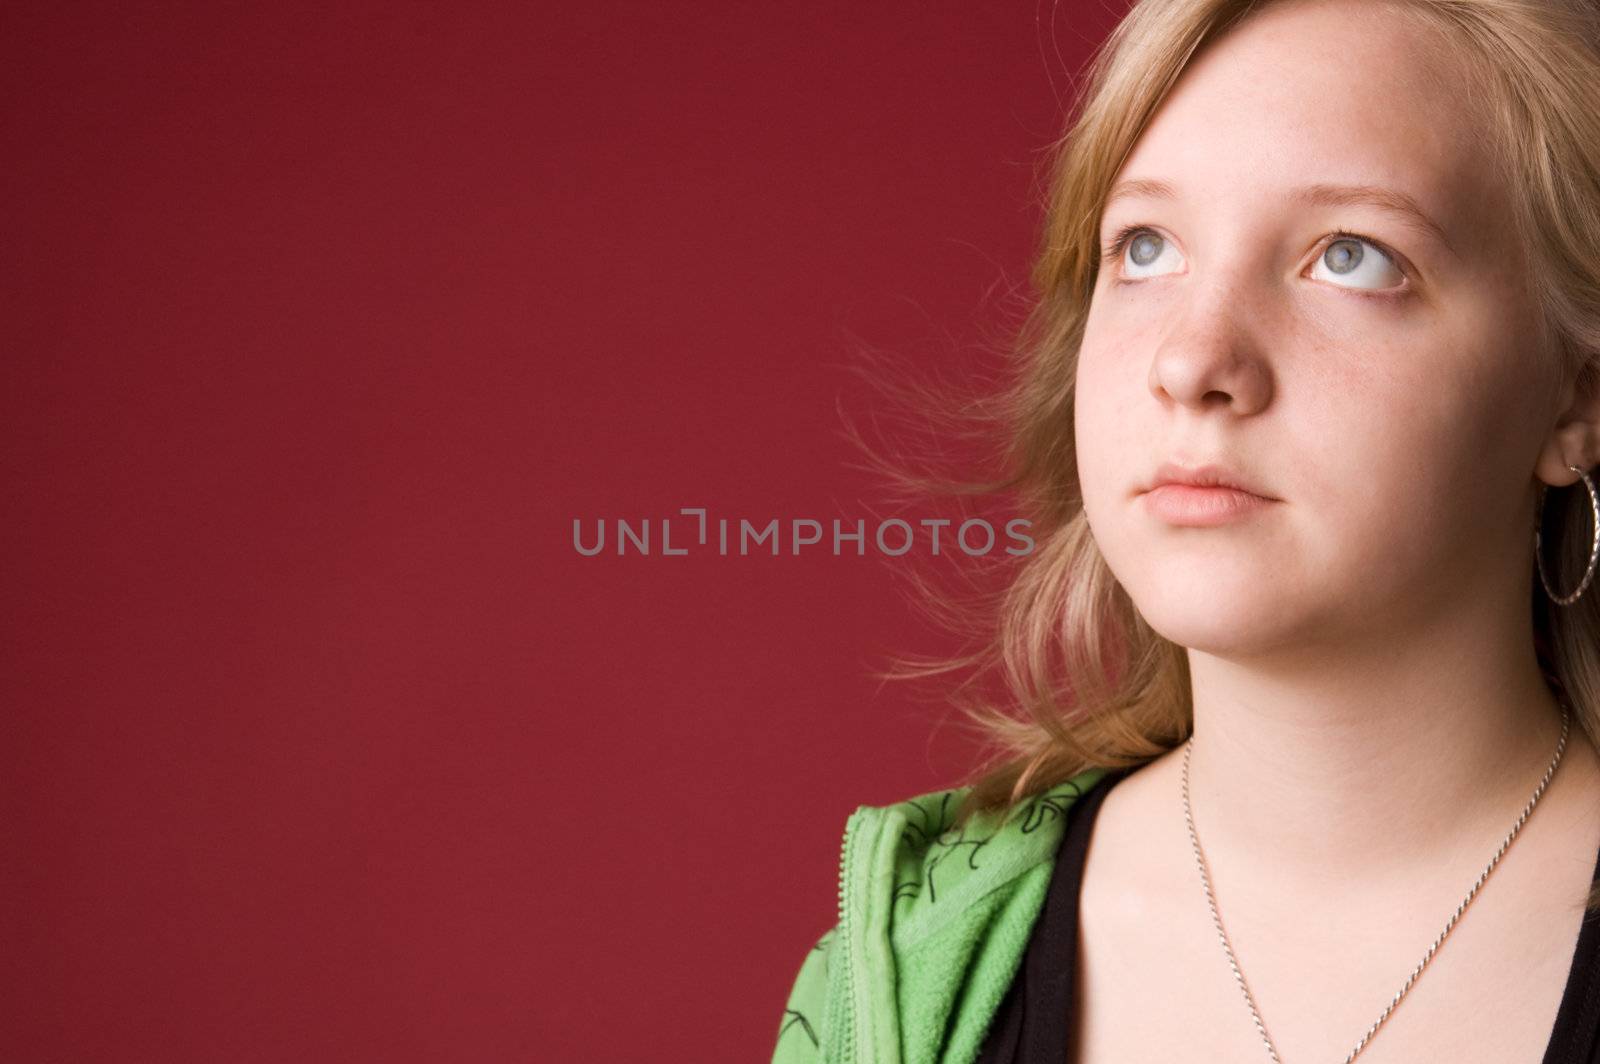 The young girl in green clothes on a red background.